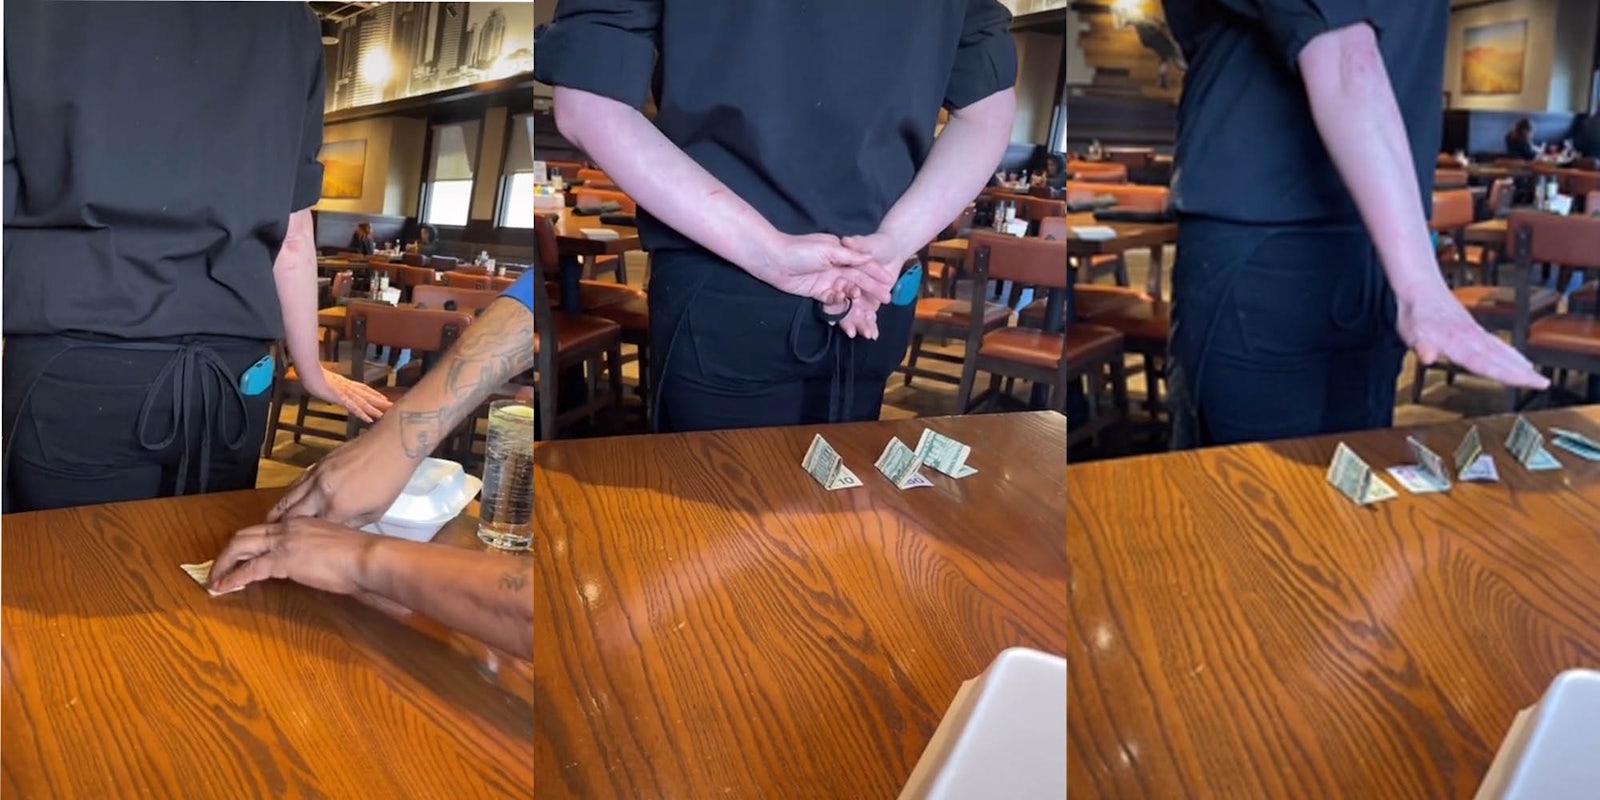 Waitress turned around arms out excited while customer arranges tip (l) Waitress turned around hands behind her back money behind her on table (c) Waitress blindly selecting tip reaching hand towards money (r)